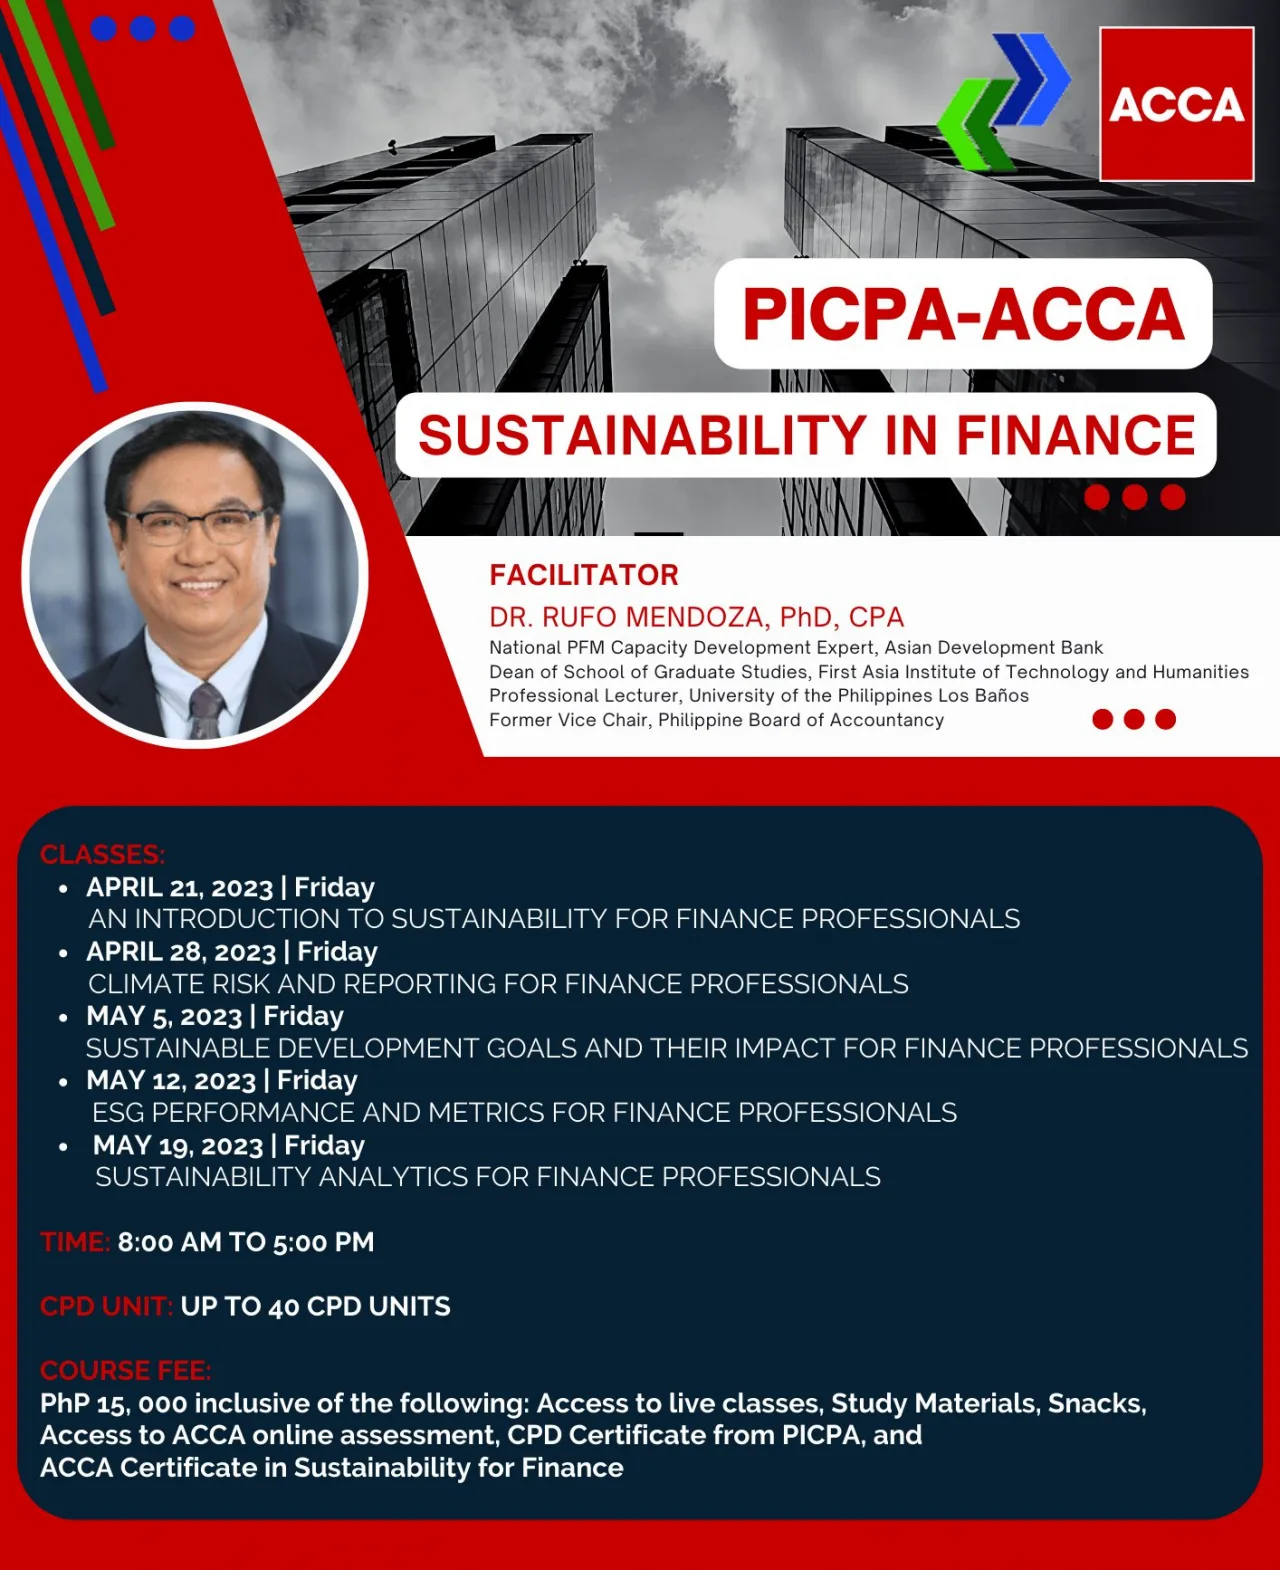 PICPA-ACCA-Sustainability-in-Finance